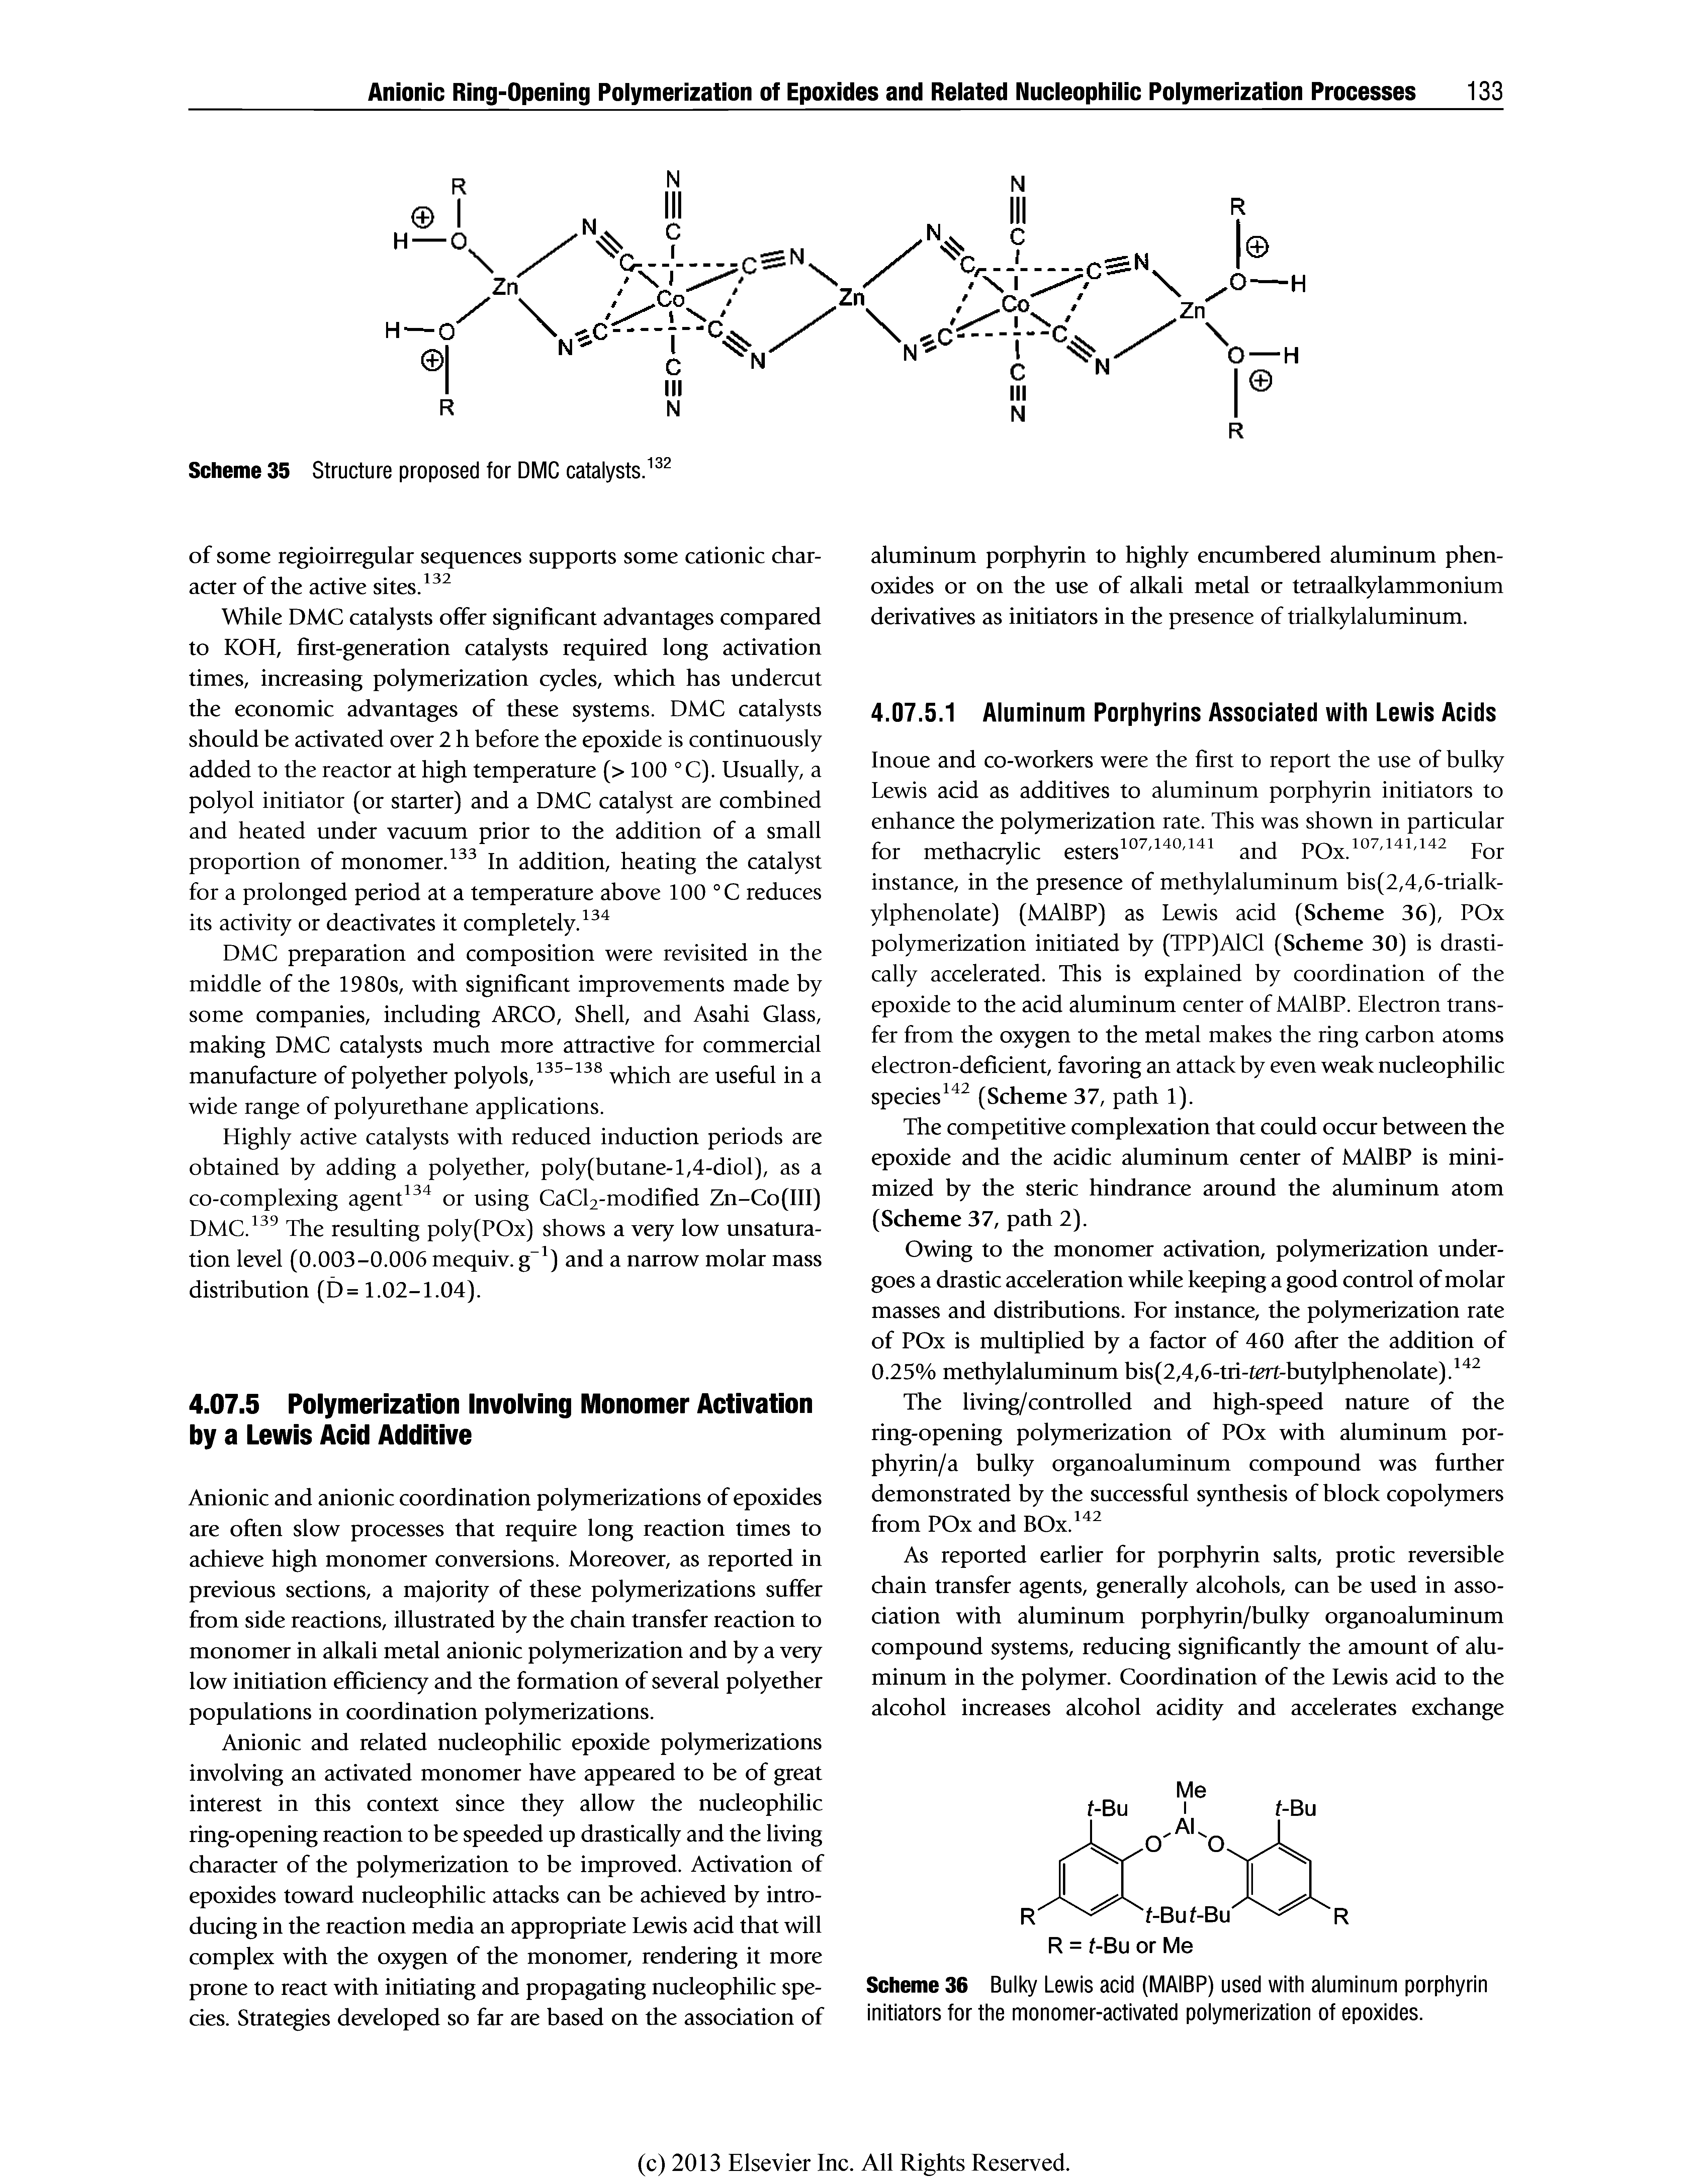 Scheme 36 Bulky Lewis acid (MAIBP) used with aluminum porphyrin initiators for the monomer-activated polymerization of epoxides.